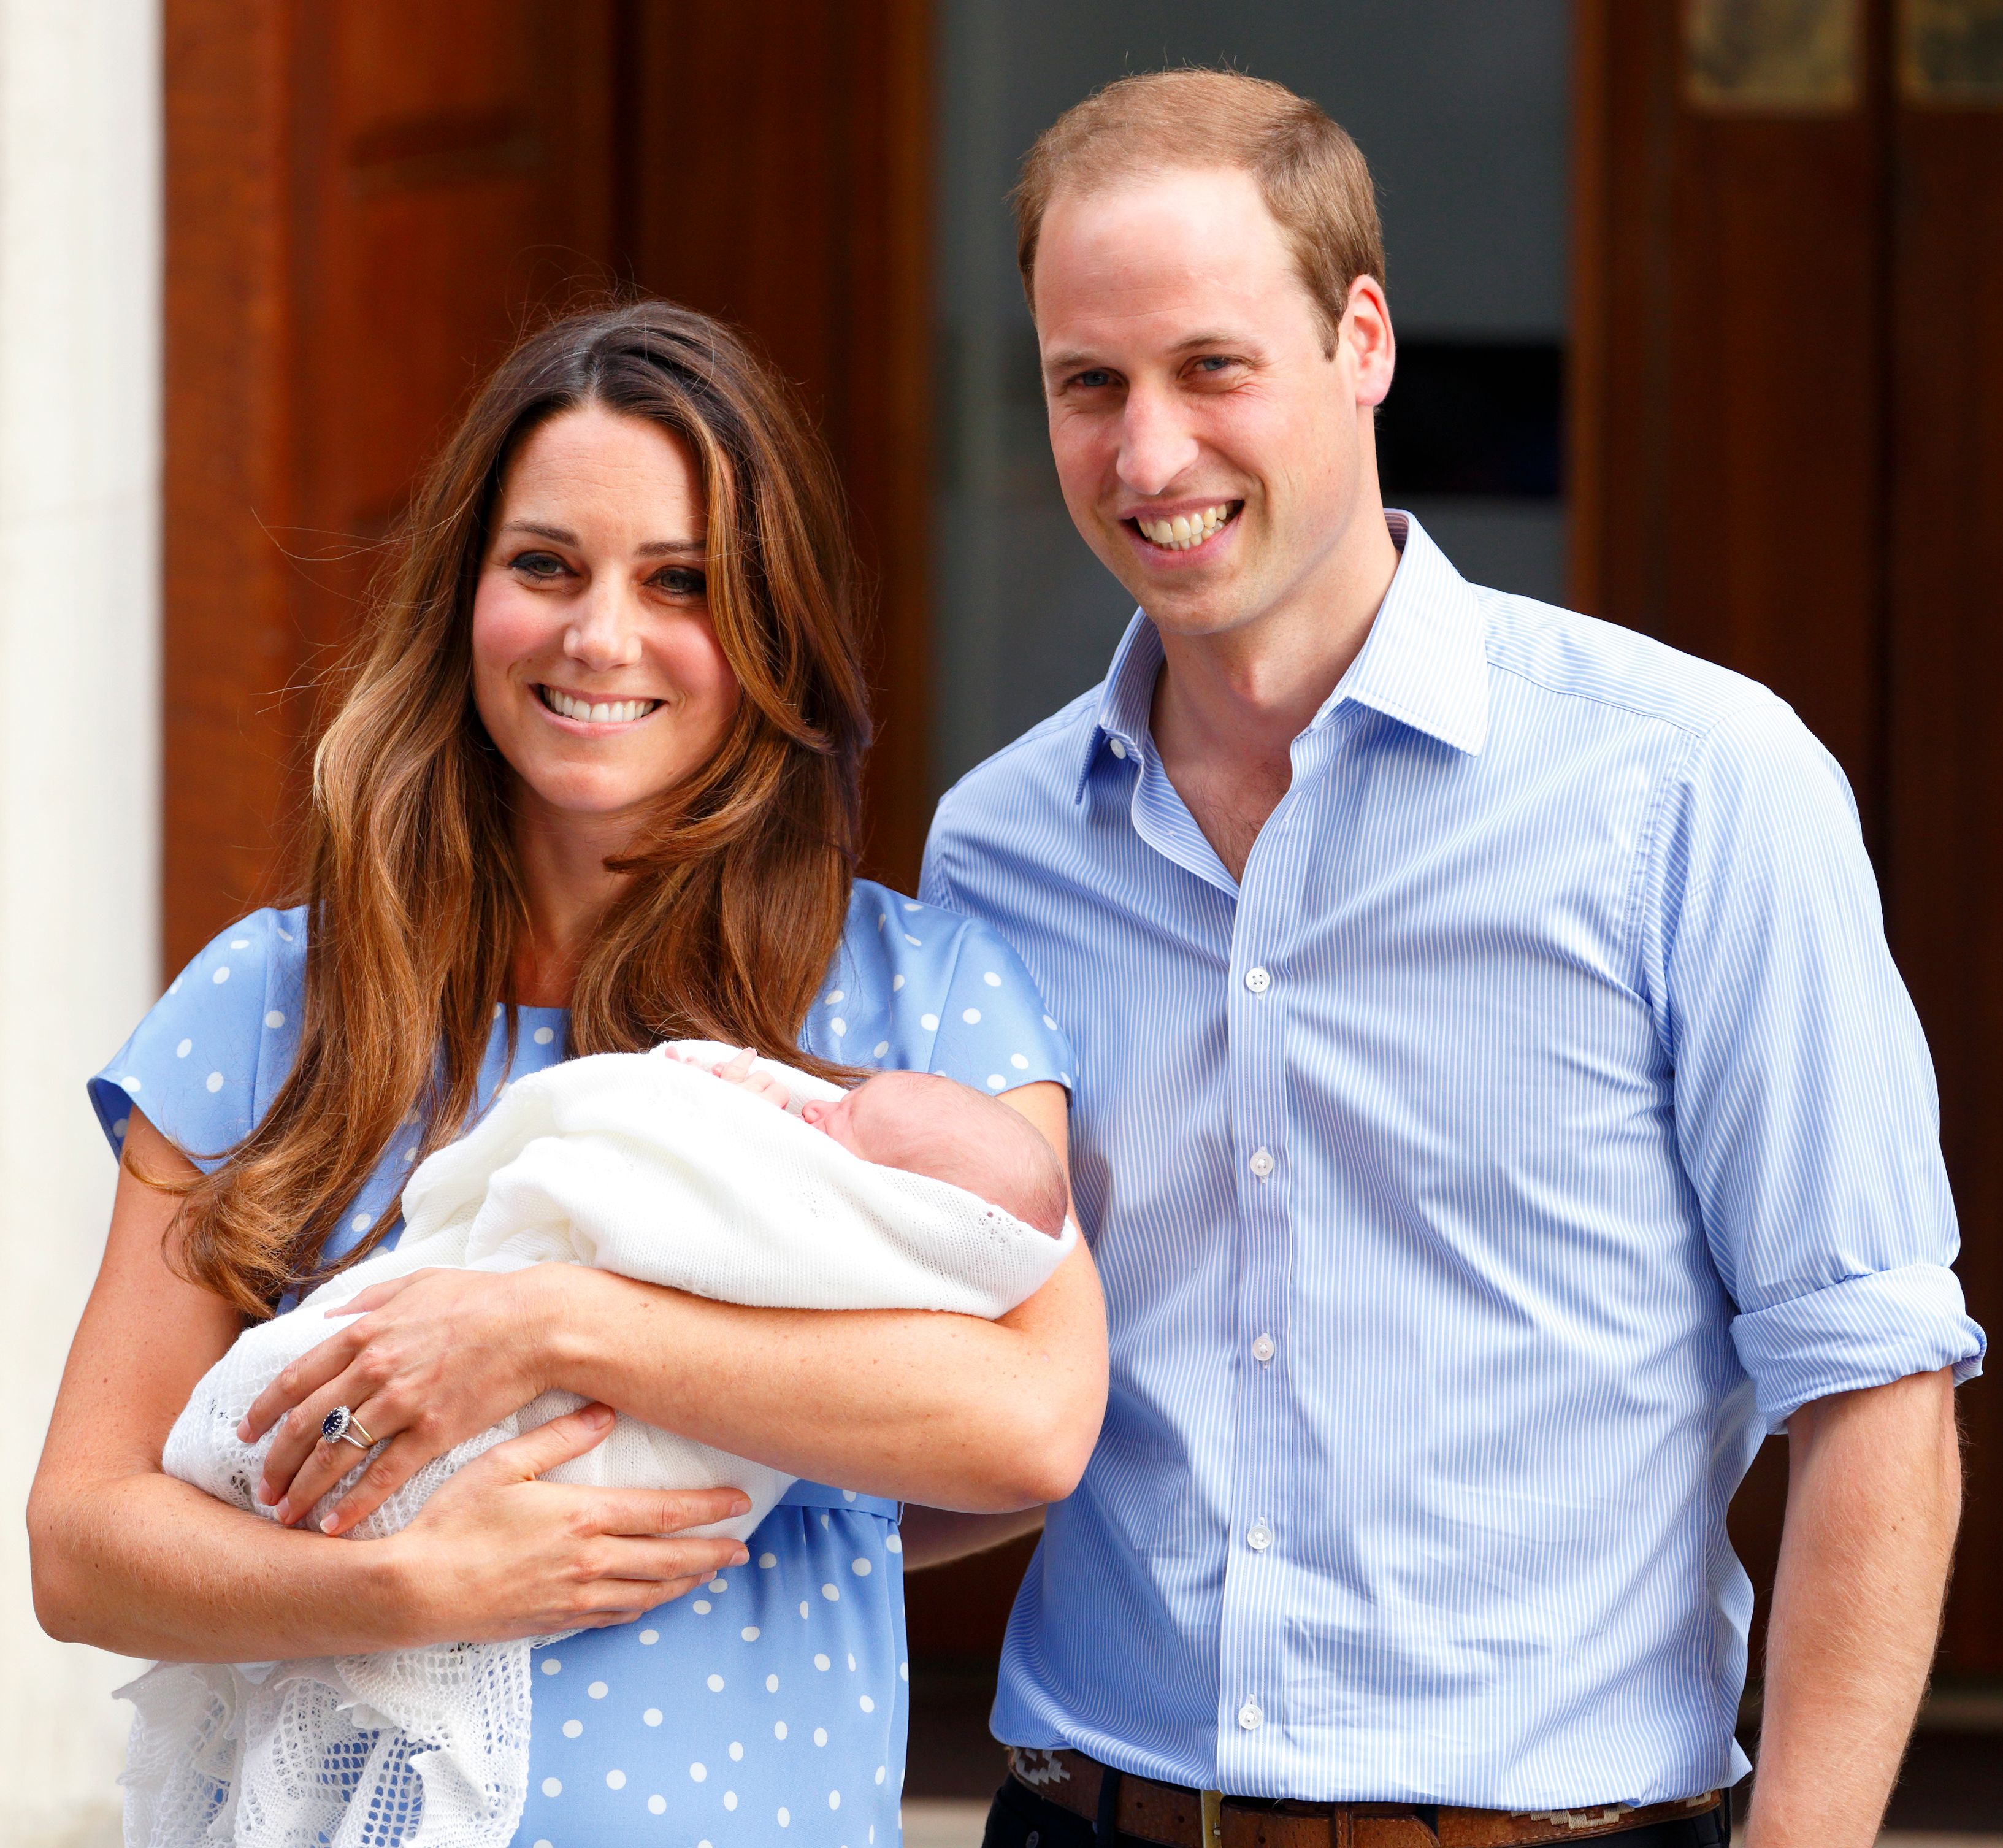 Katherine Middleton and Prince William with their newborn son at St Mary's Hospital on July 23, 2013. | Photo: Getty Images